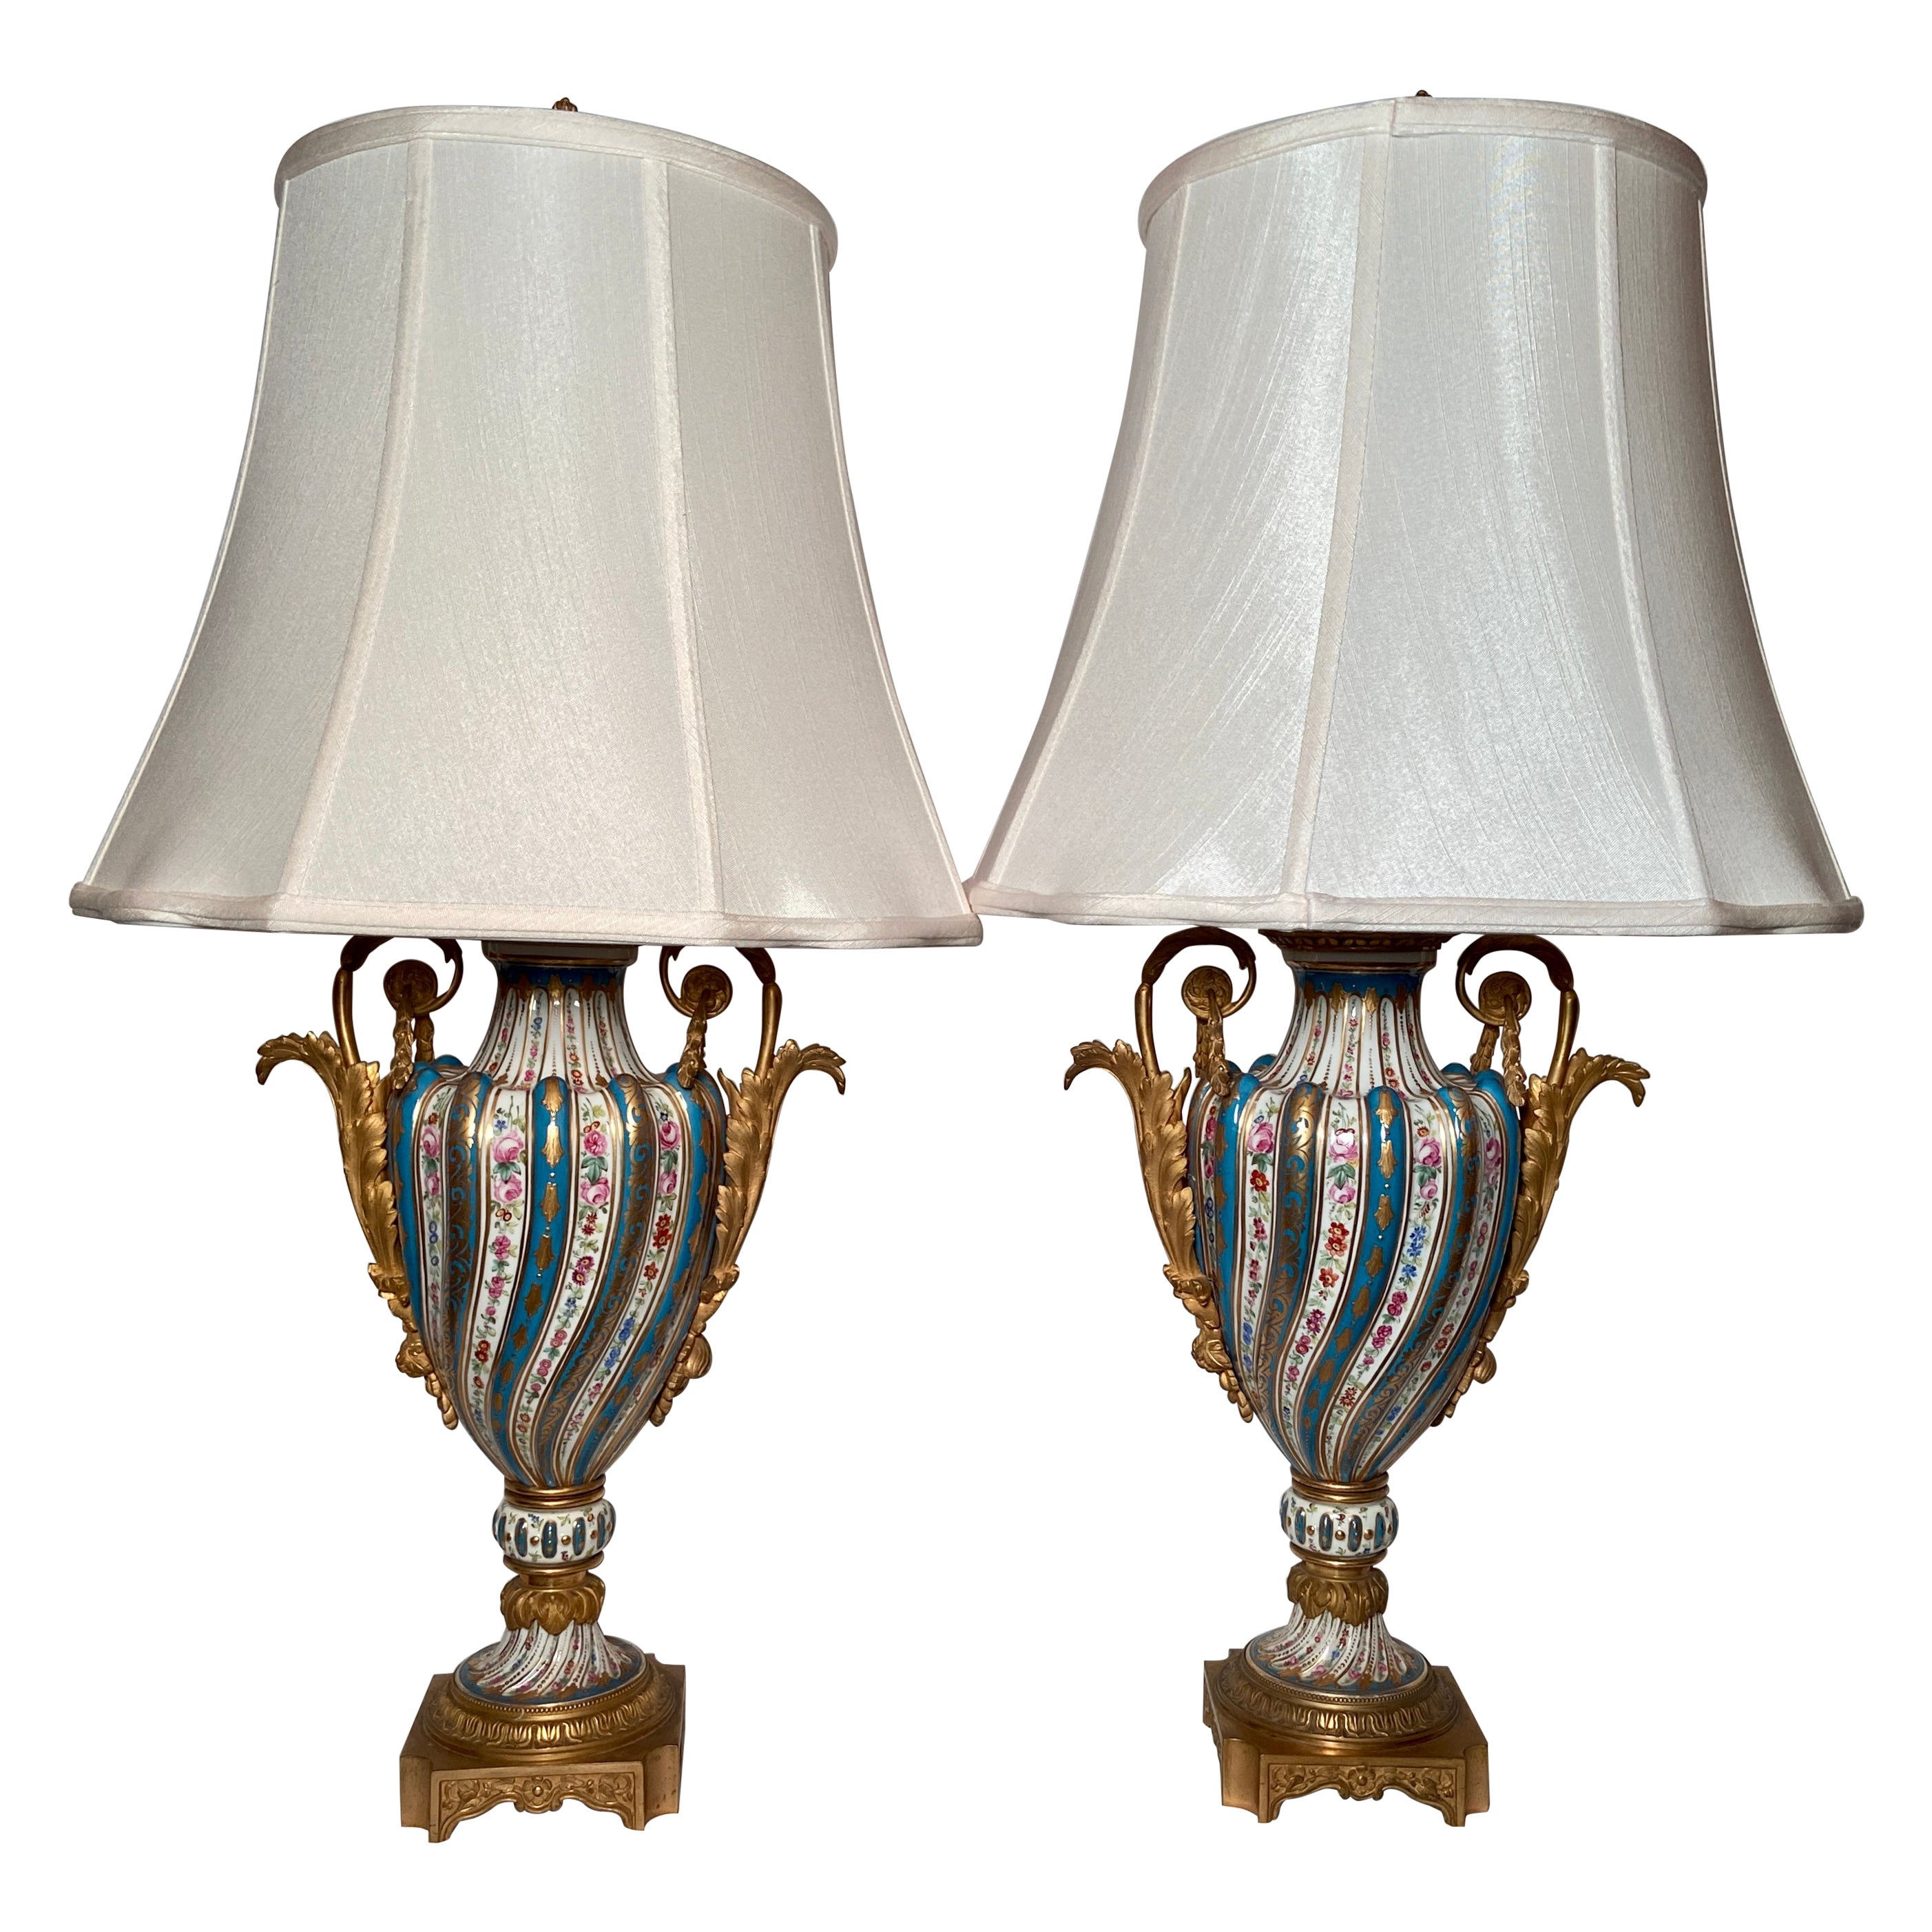 Pair Antique French Ormolu Mounted Sevres Porcelain Lamps, circa 1860-1870 For Sale